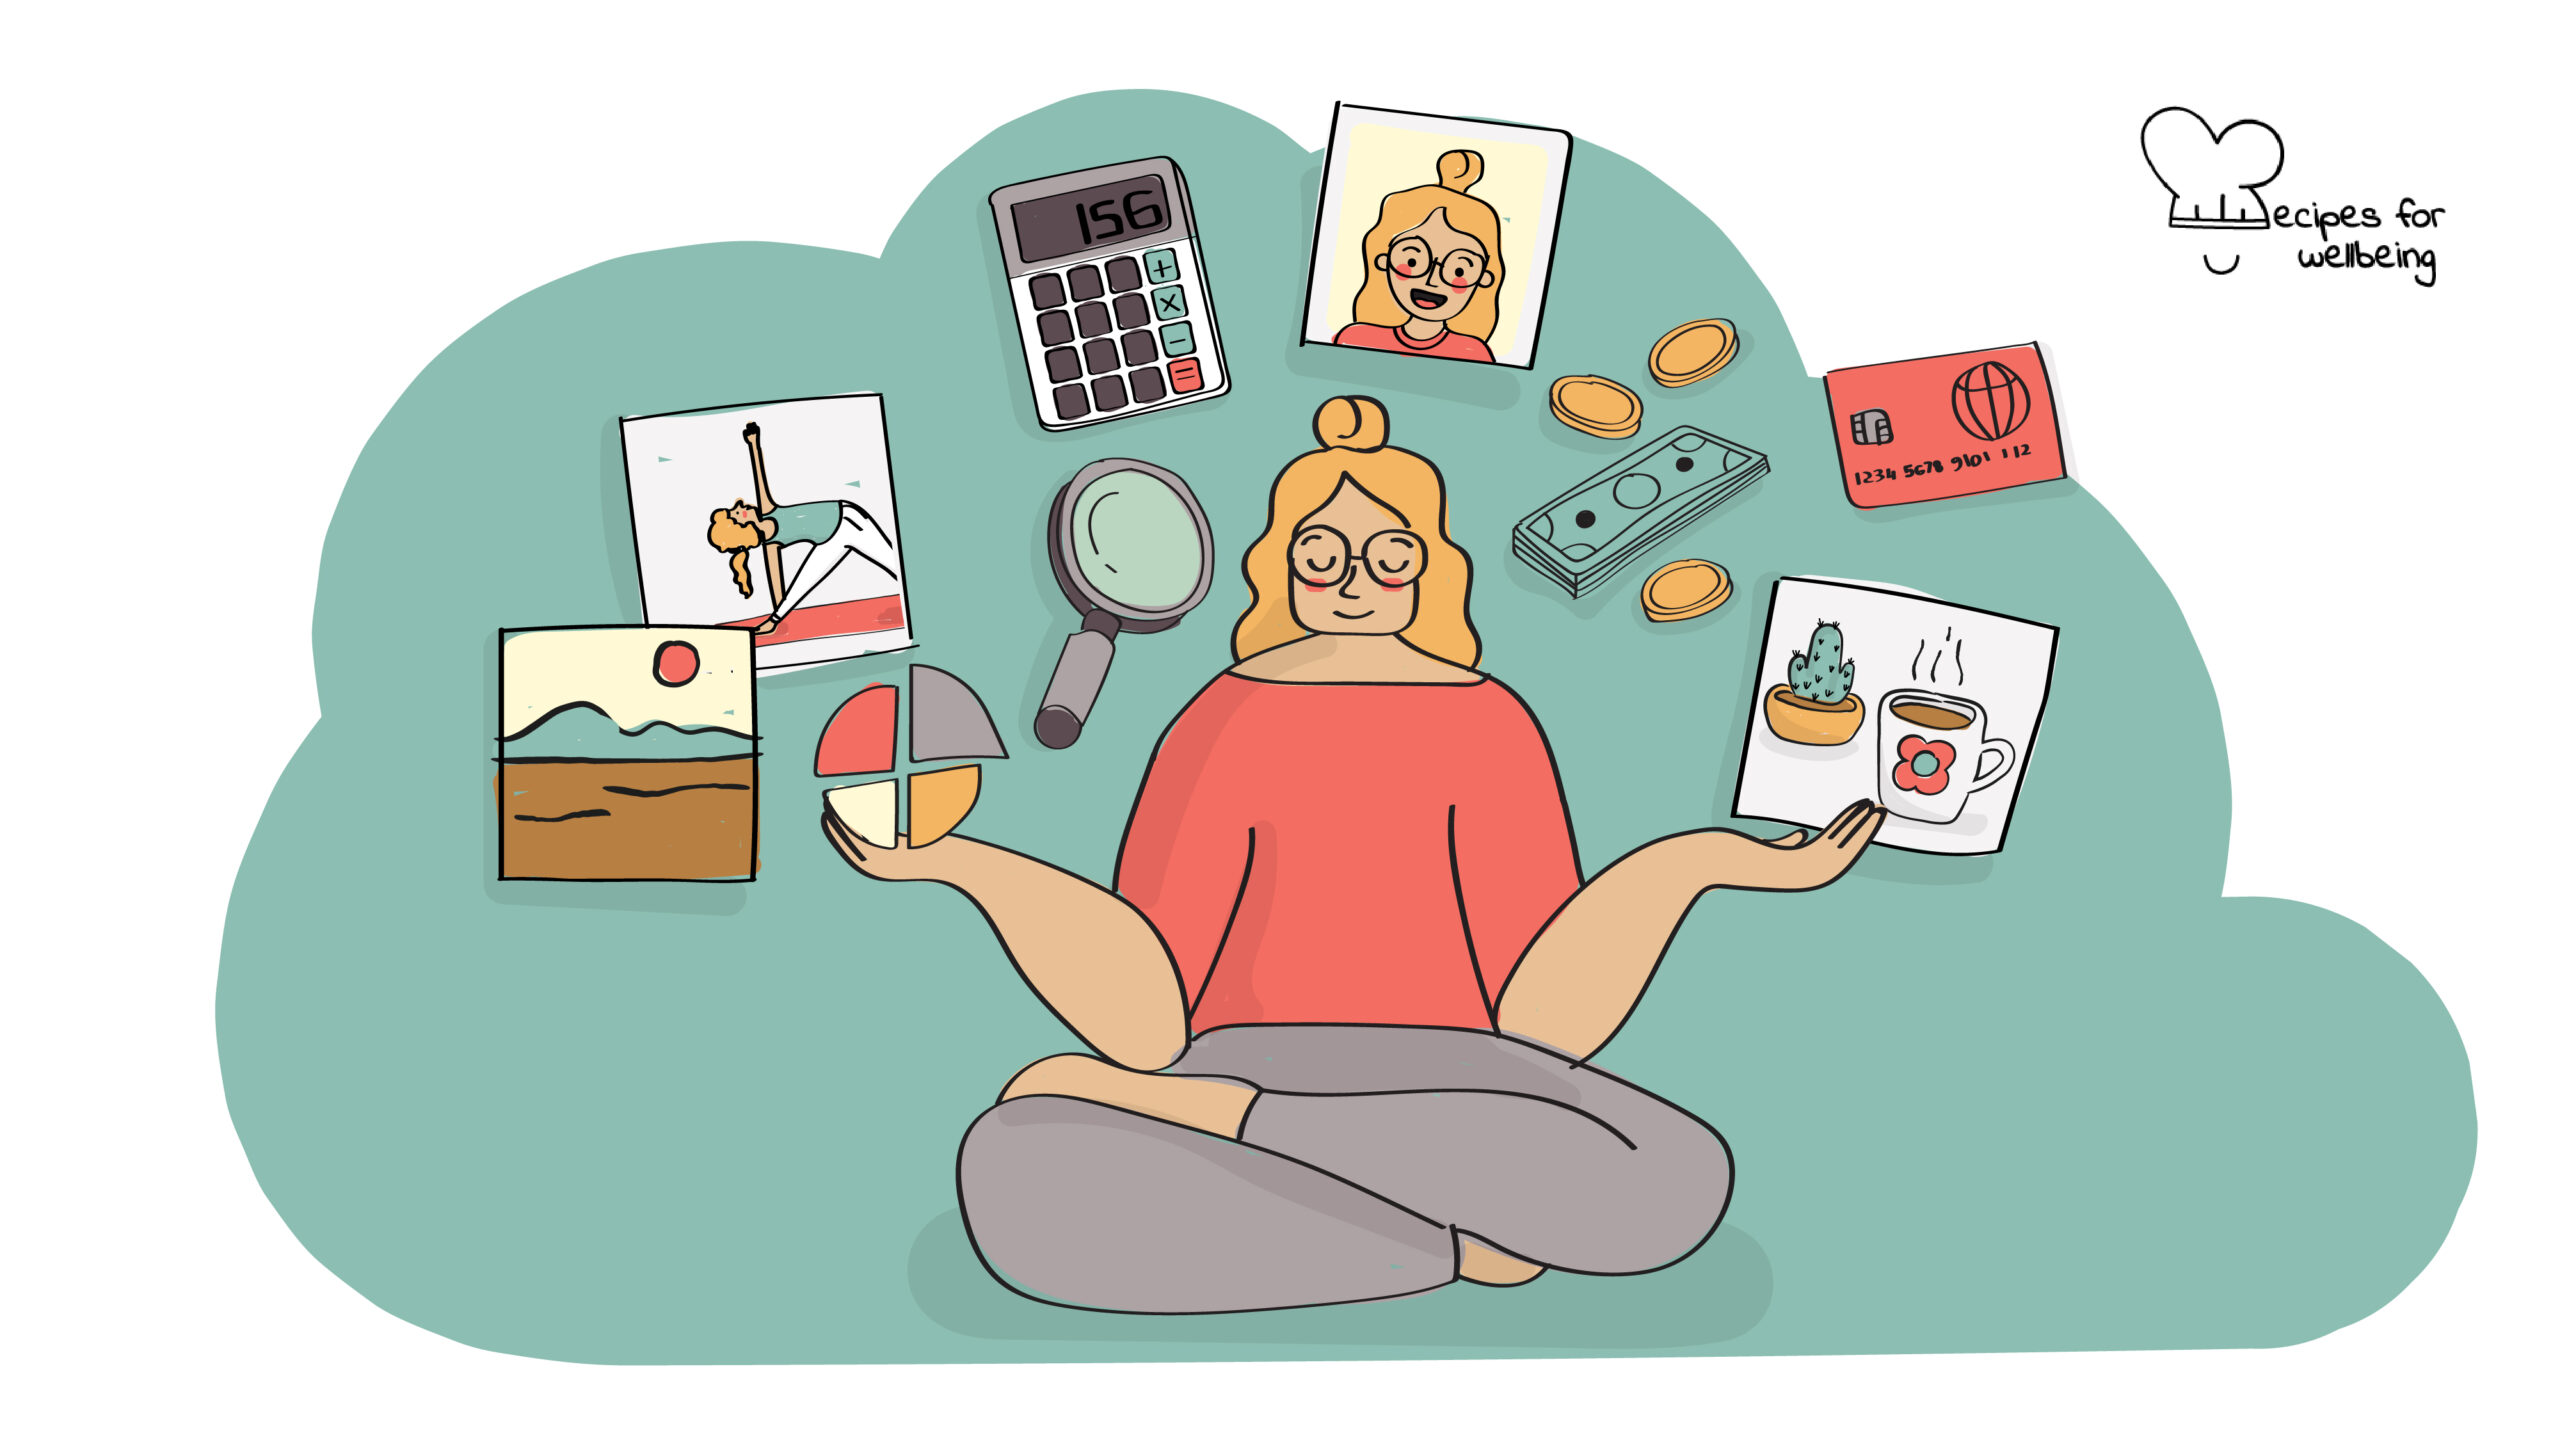 Illustration of a person surrounded by a few images of wellbeing activities (e.g. yoga, a nature landscape, a coffee mug) and financial icons (e.g. a calculator, money, a credit/debit card). © Recipes for Wellbeing